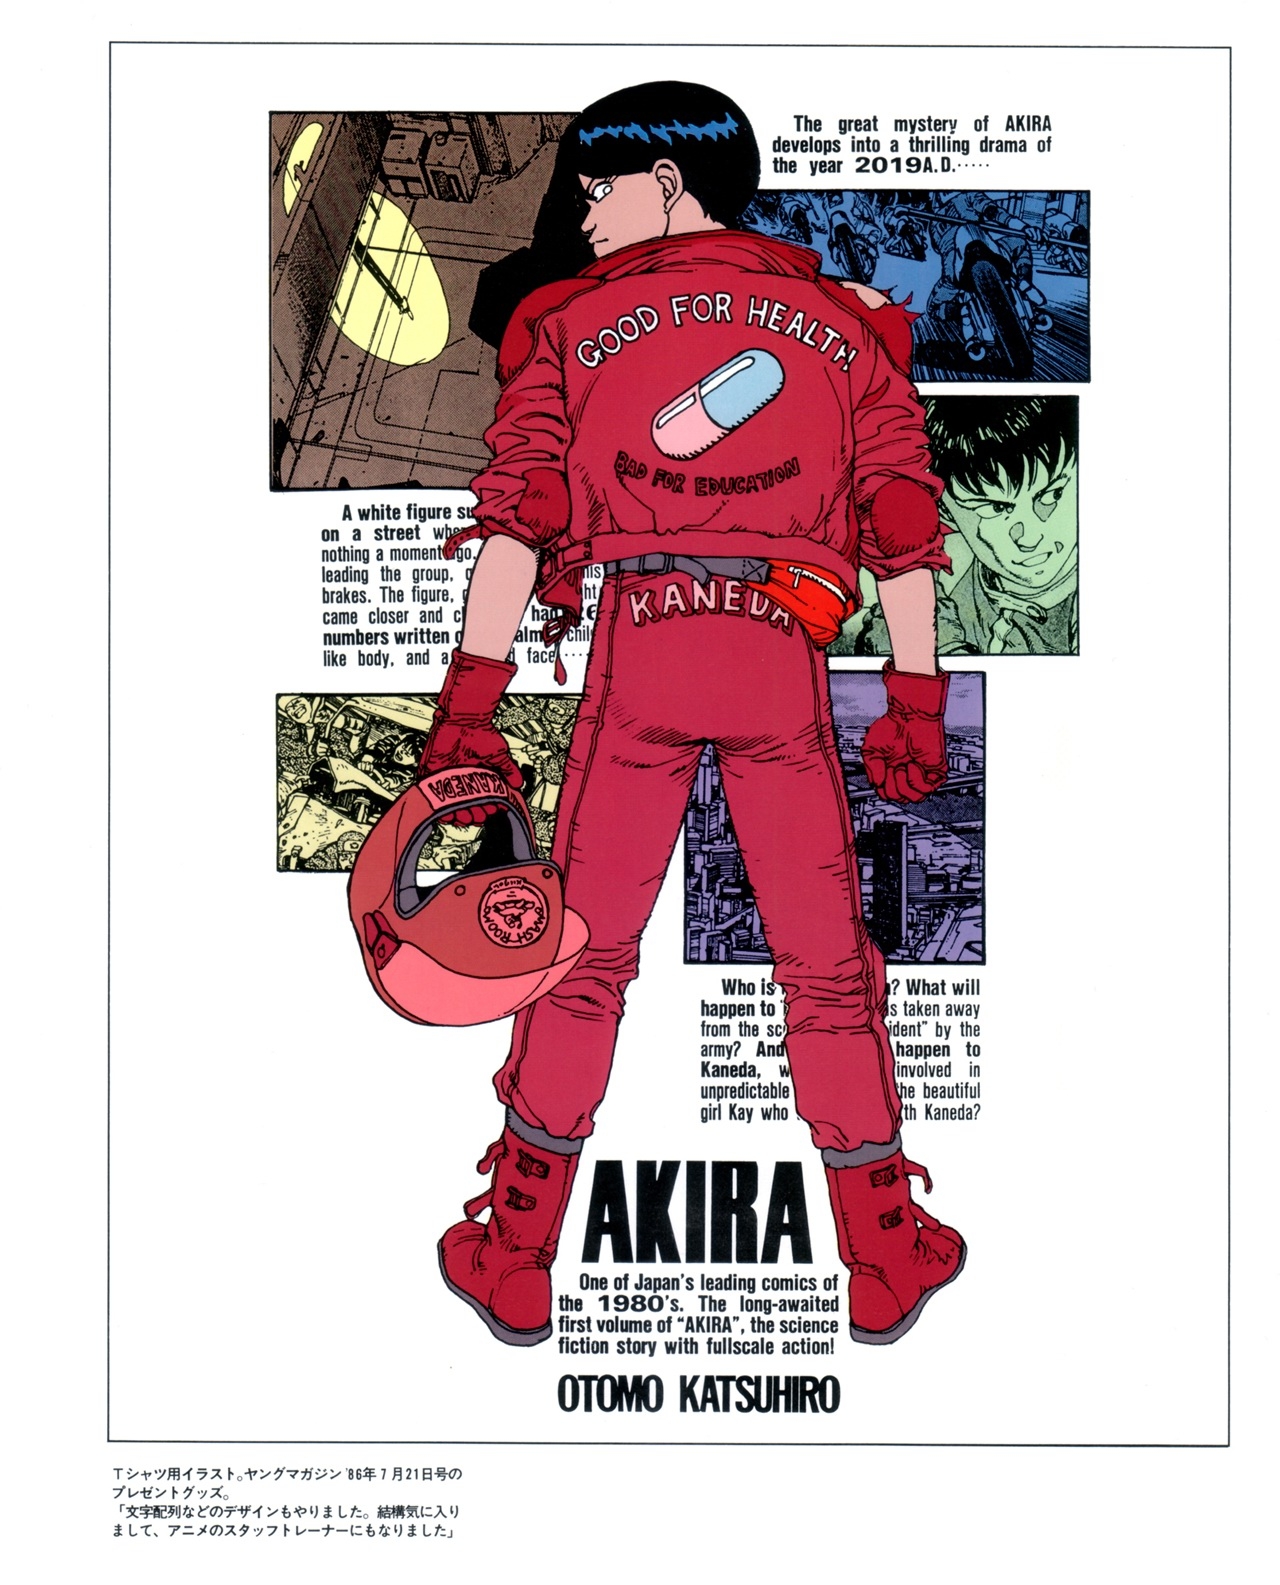 Akira club - The memory of Akira lives on in our hearts! 30